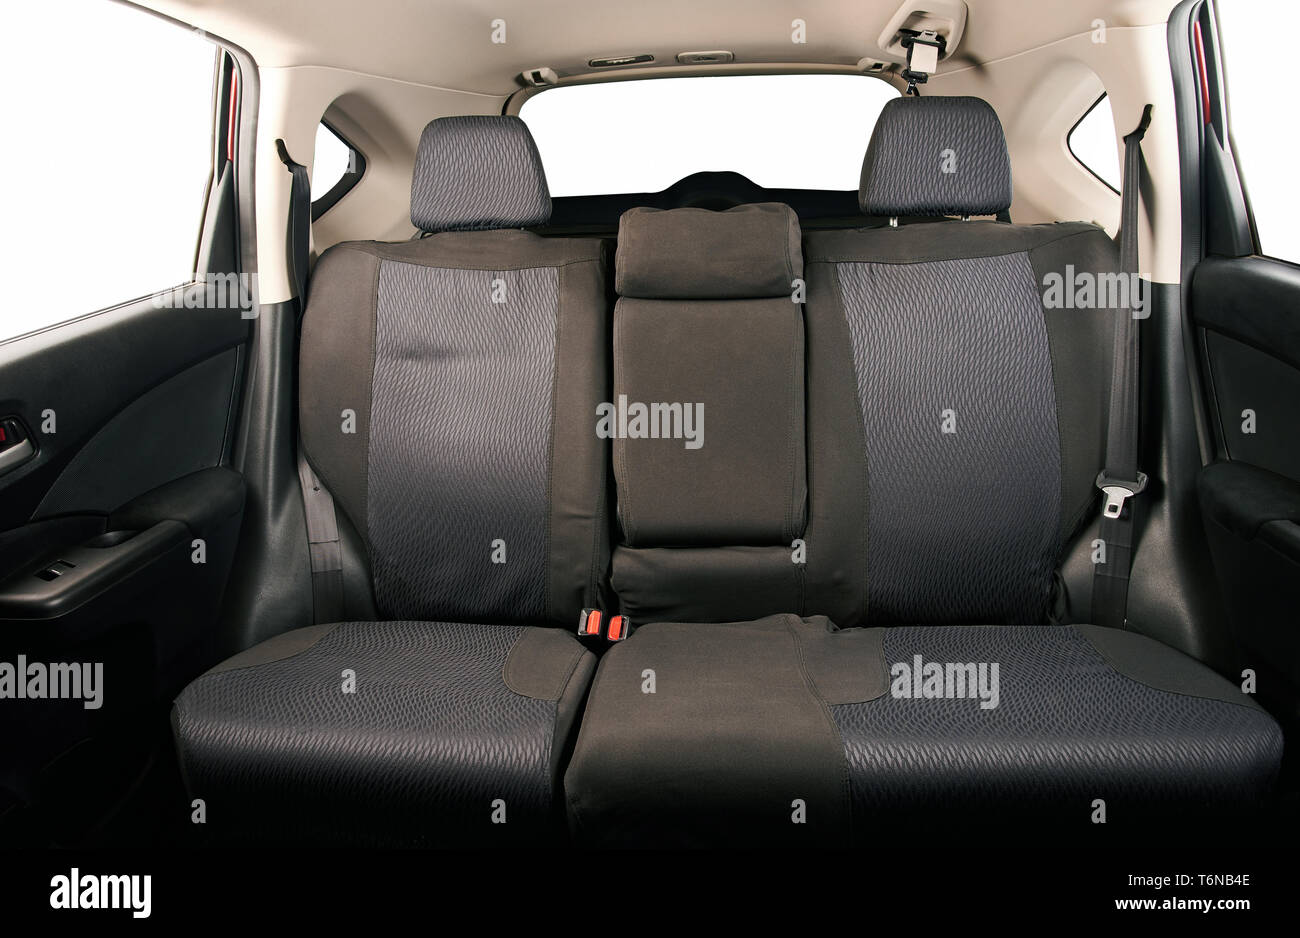 Clean back seats on SUV car isolated on white background Stock Photo